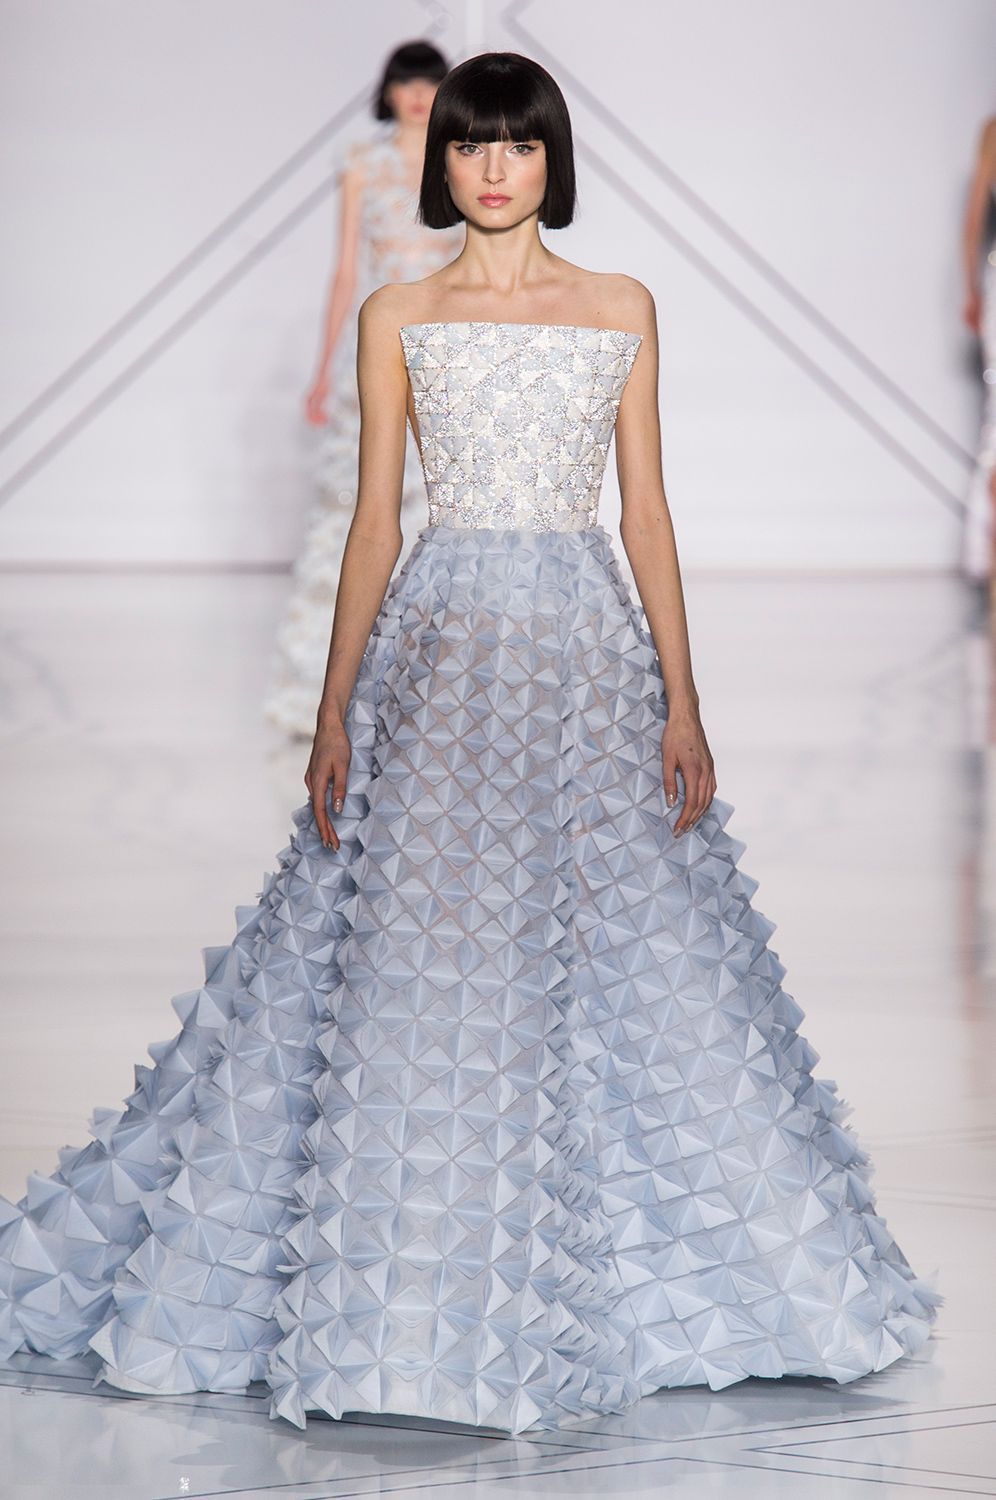 50 Couture Wedding Dresses That Will Make Your Heart Ache -   19 beauty Dresses couture ideas